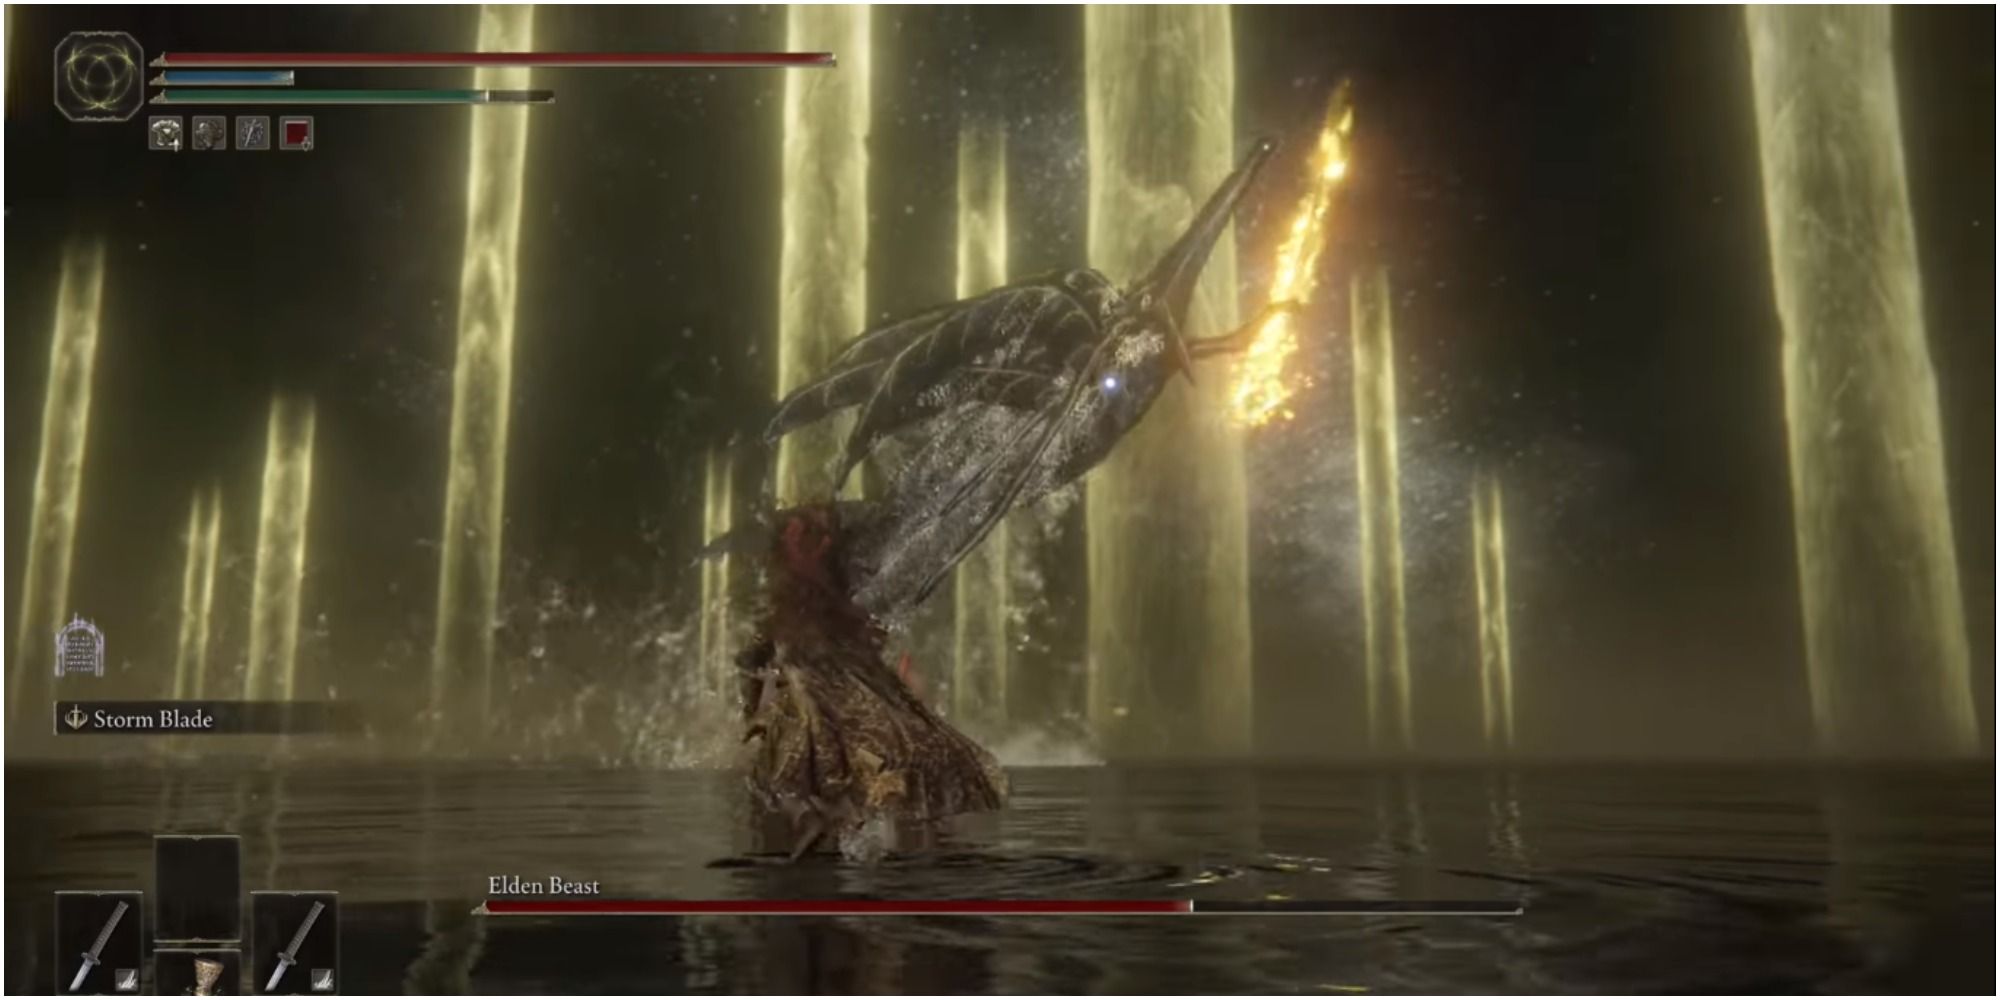 The boss flying in the air and attacking the player with its flaming sword.